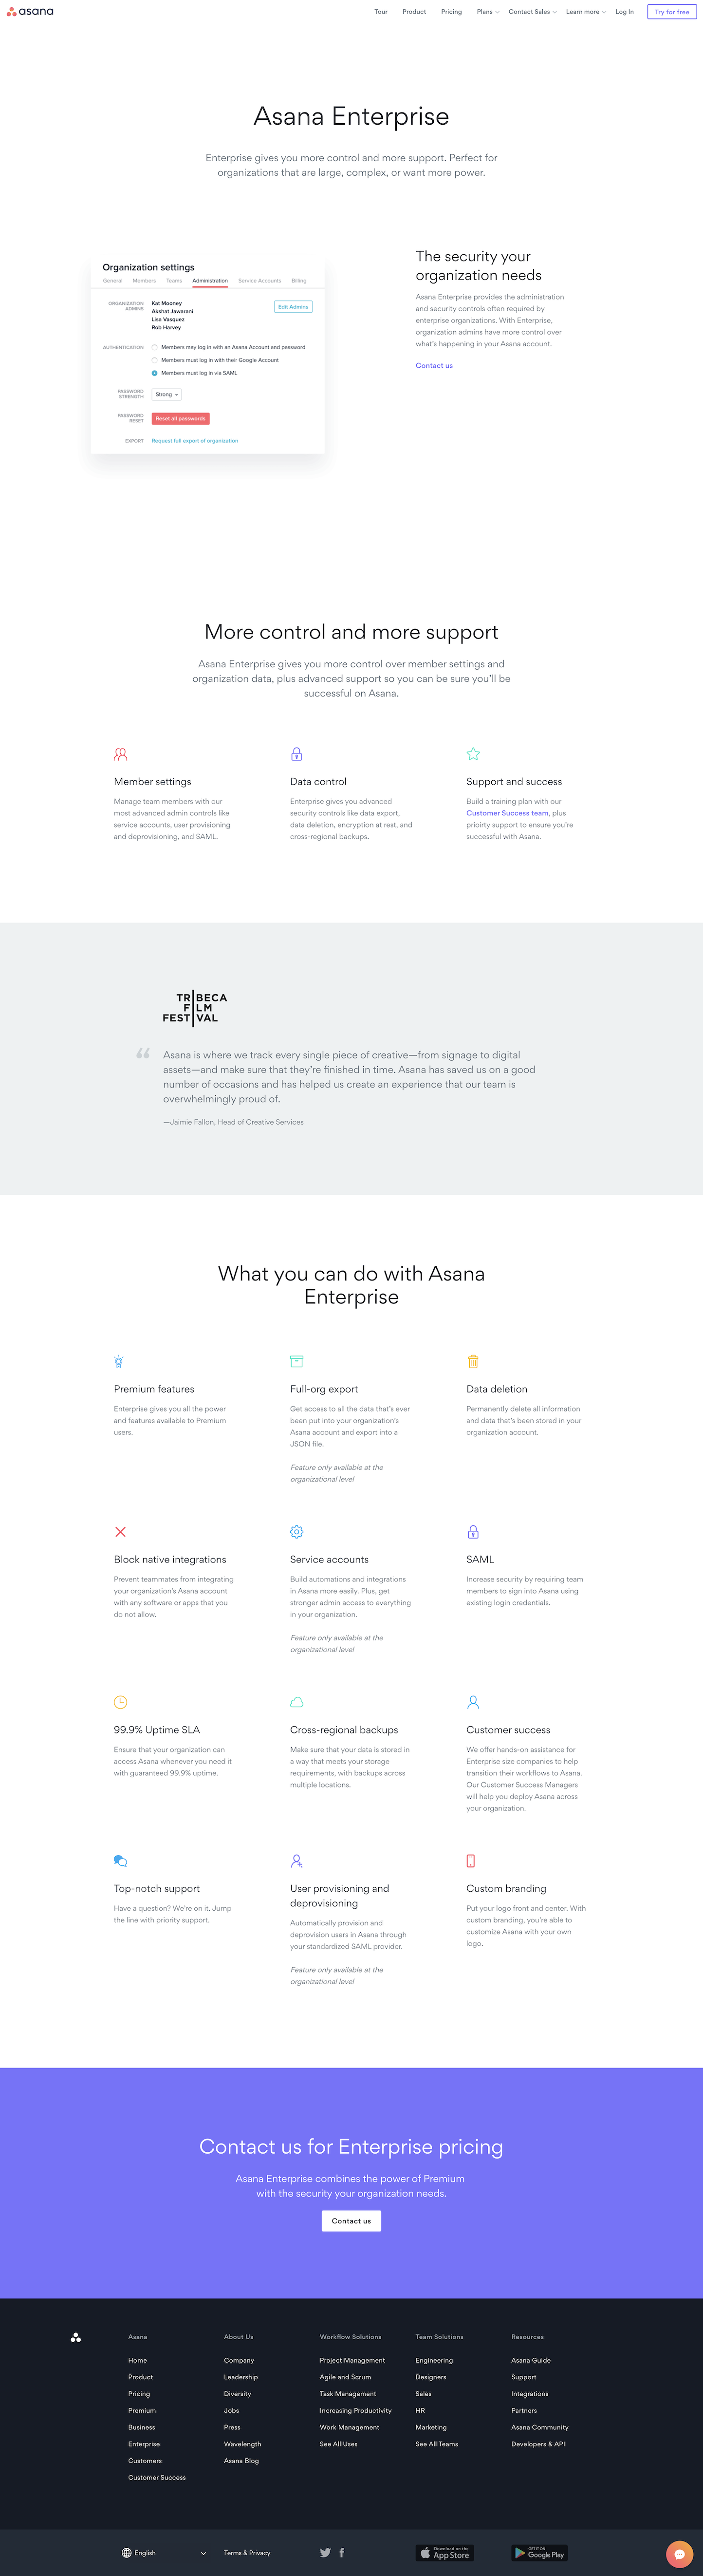 Screenshot of the Enterprise page from the Asana website.